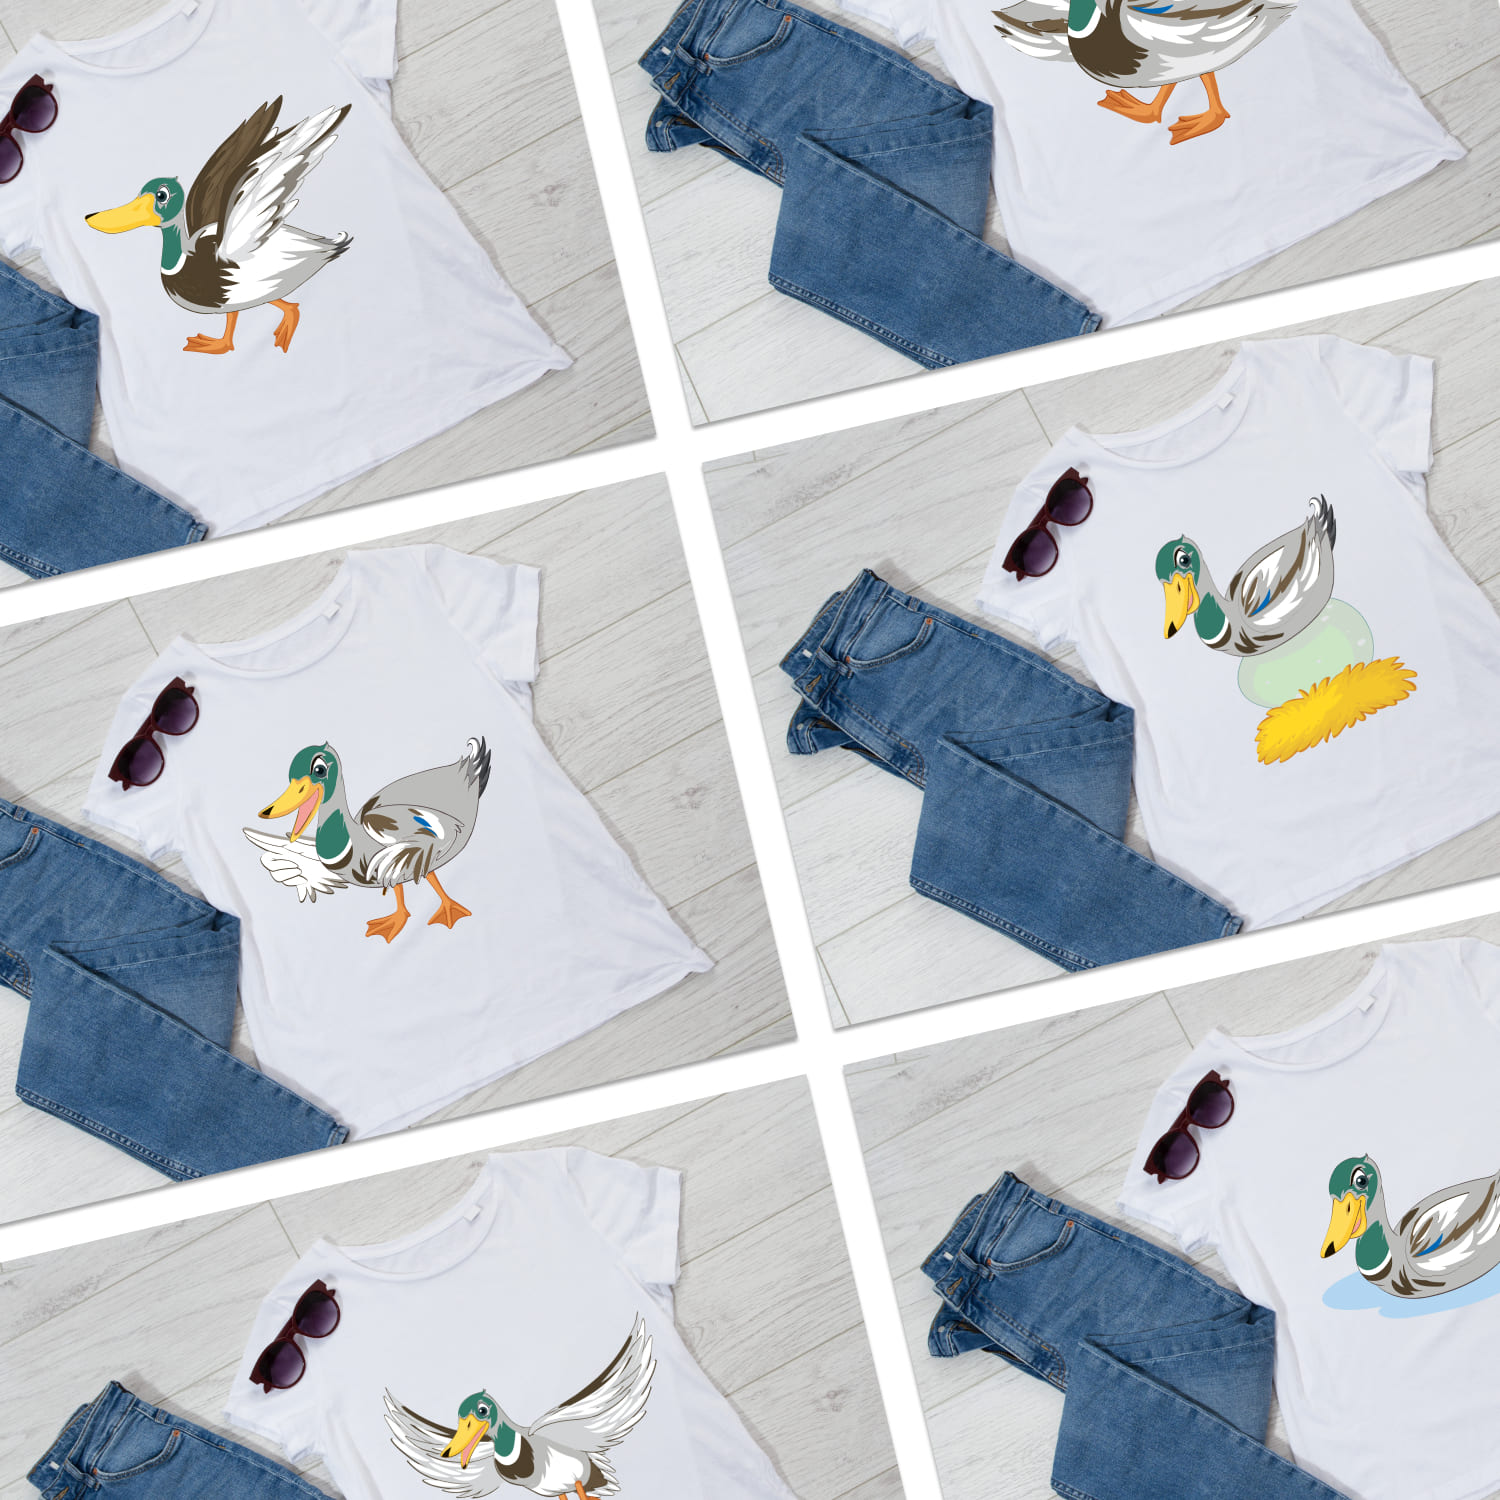 Set of t-shirt images with irresistible wood duck prints.